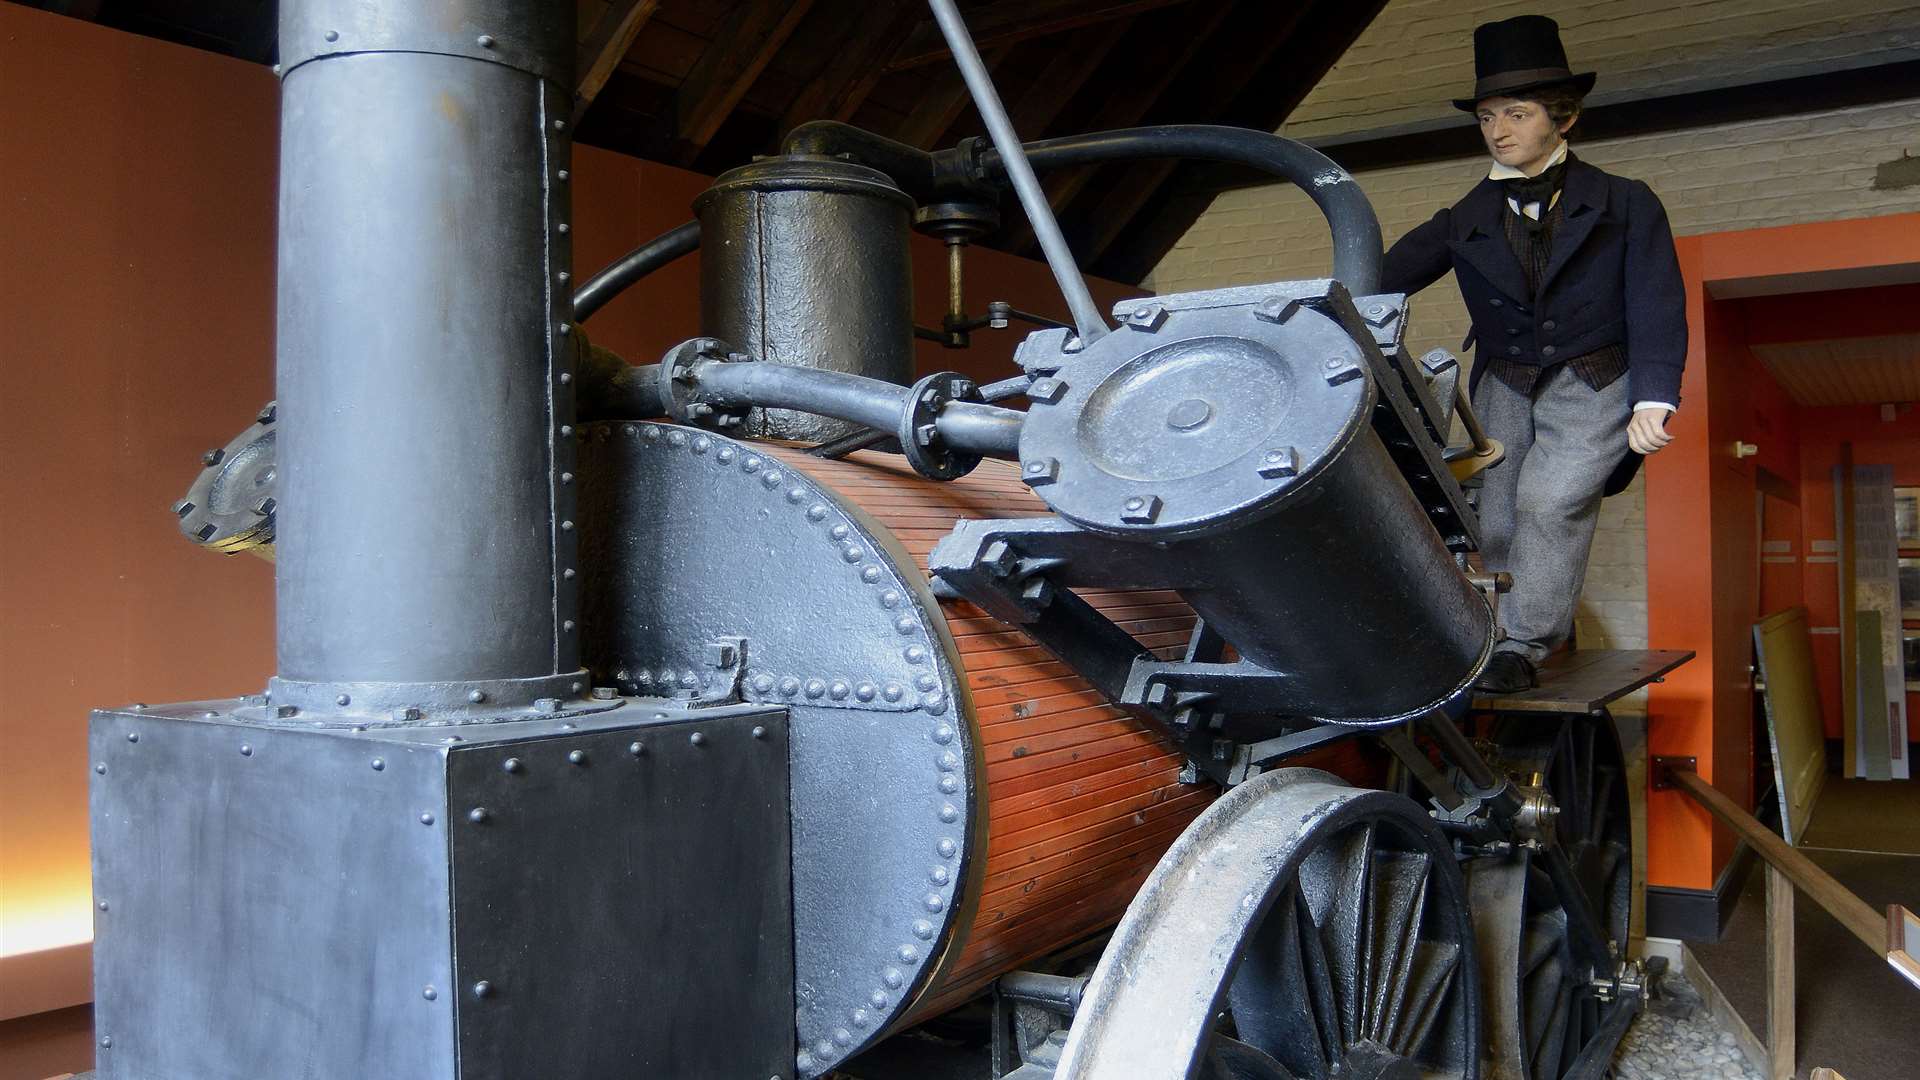 The Invicta Engine is currently housed at the Canterbury Heritage Museum